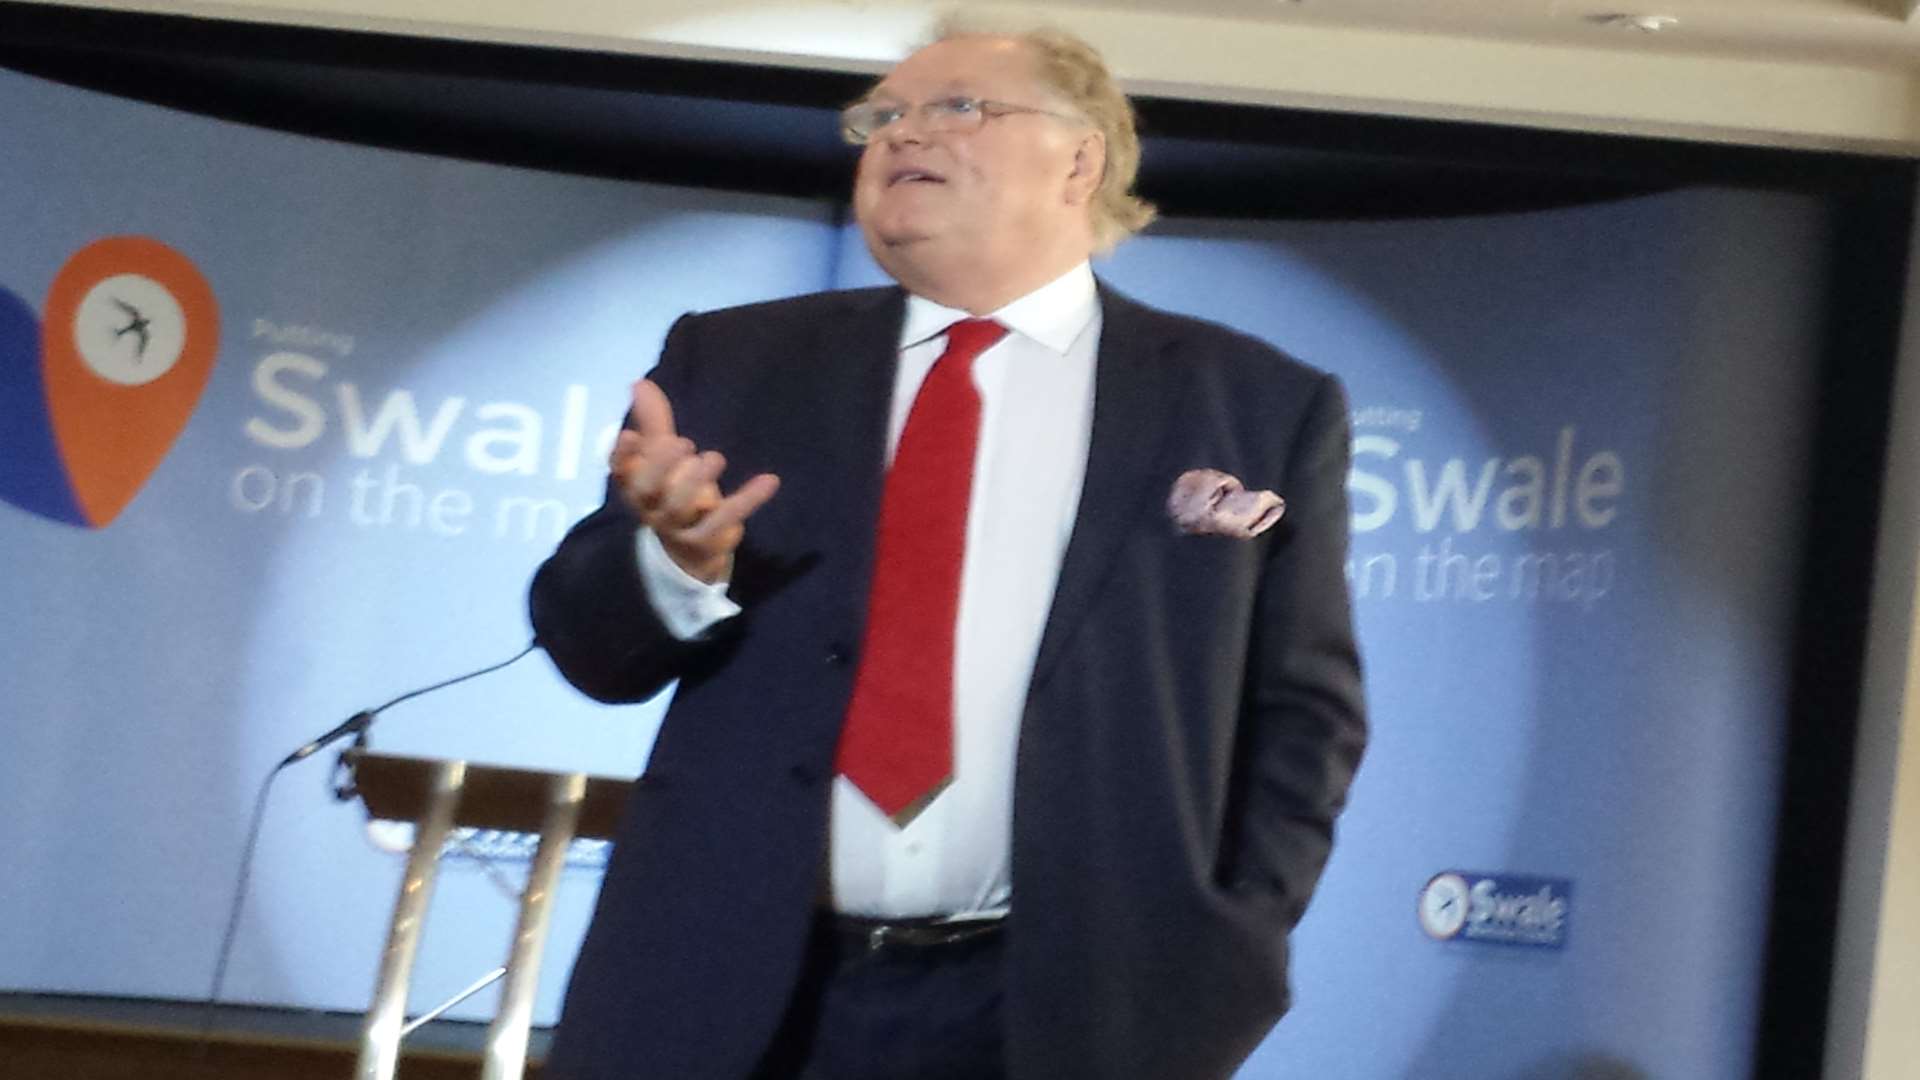 Lord Digby Jones speaking at the Swale Regeneration Conference